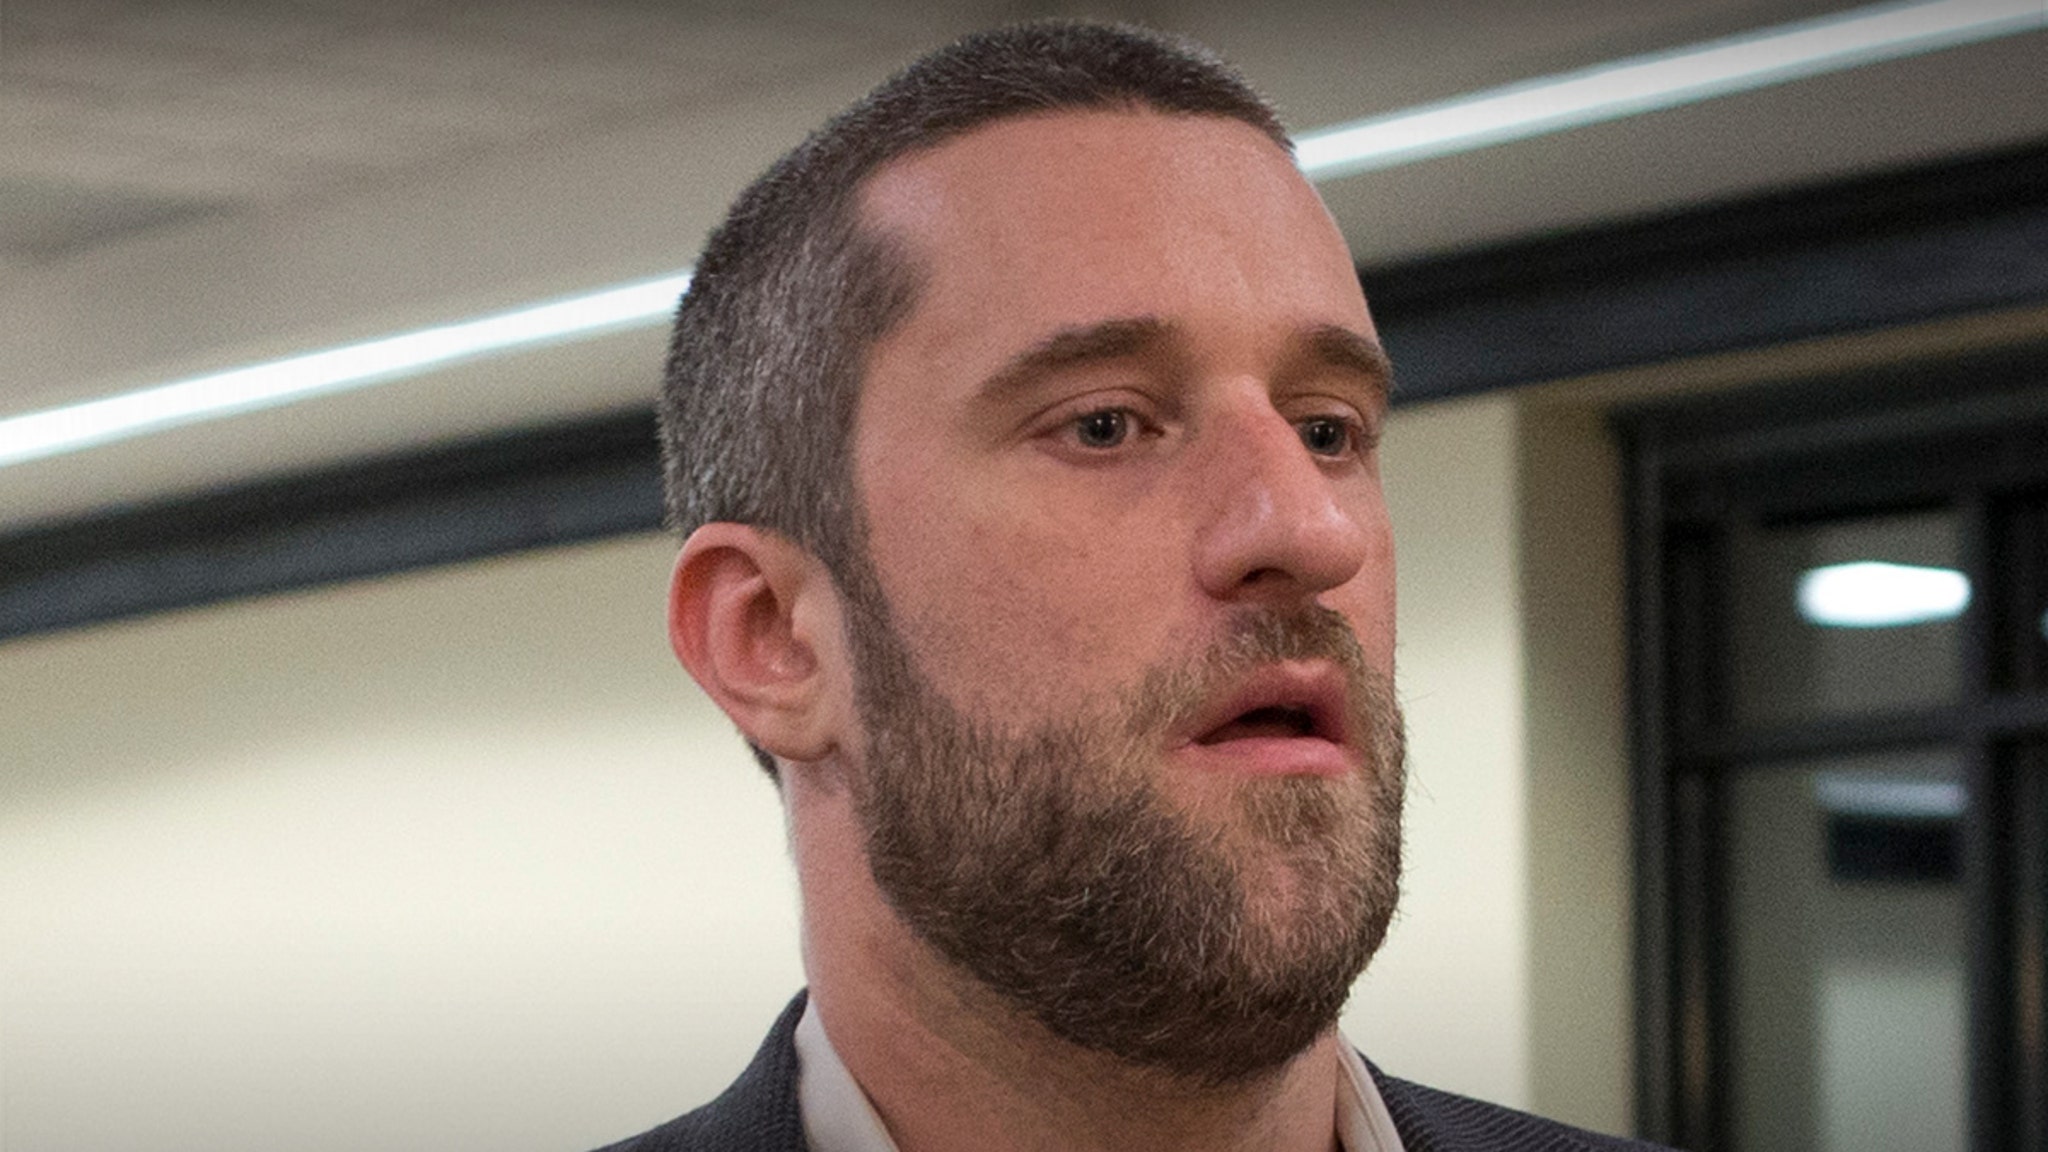 ‘Saved By the Bell’ star Dustin Diamond hospitalized, cancer likely